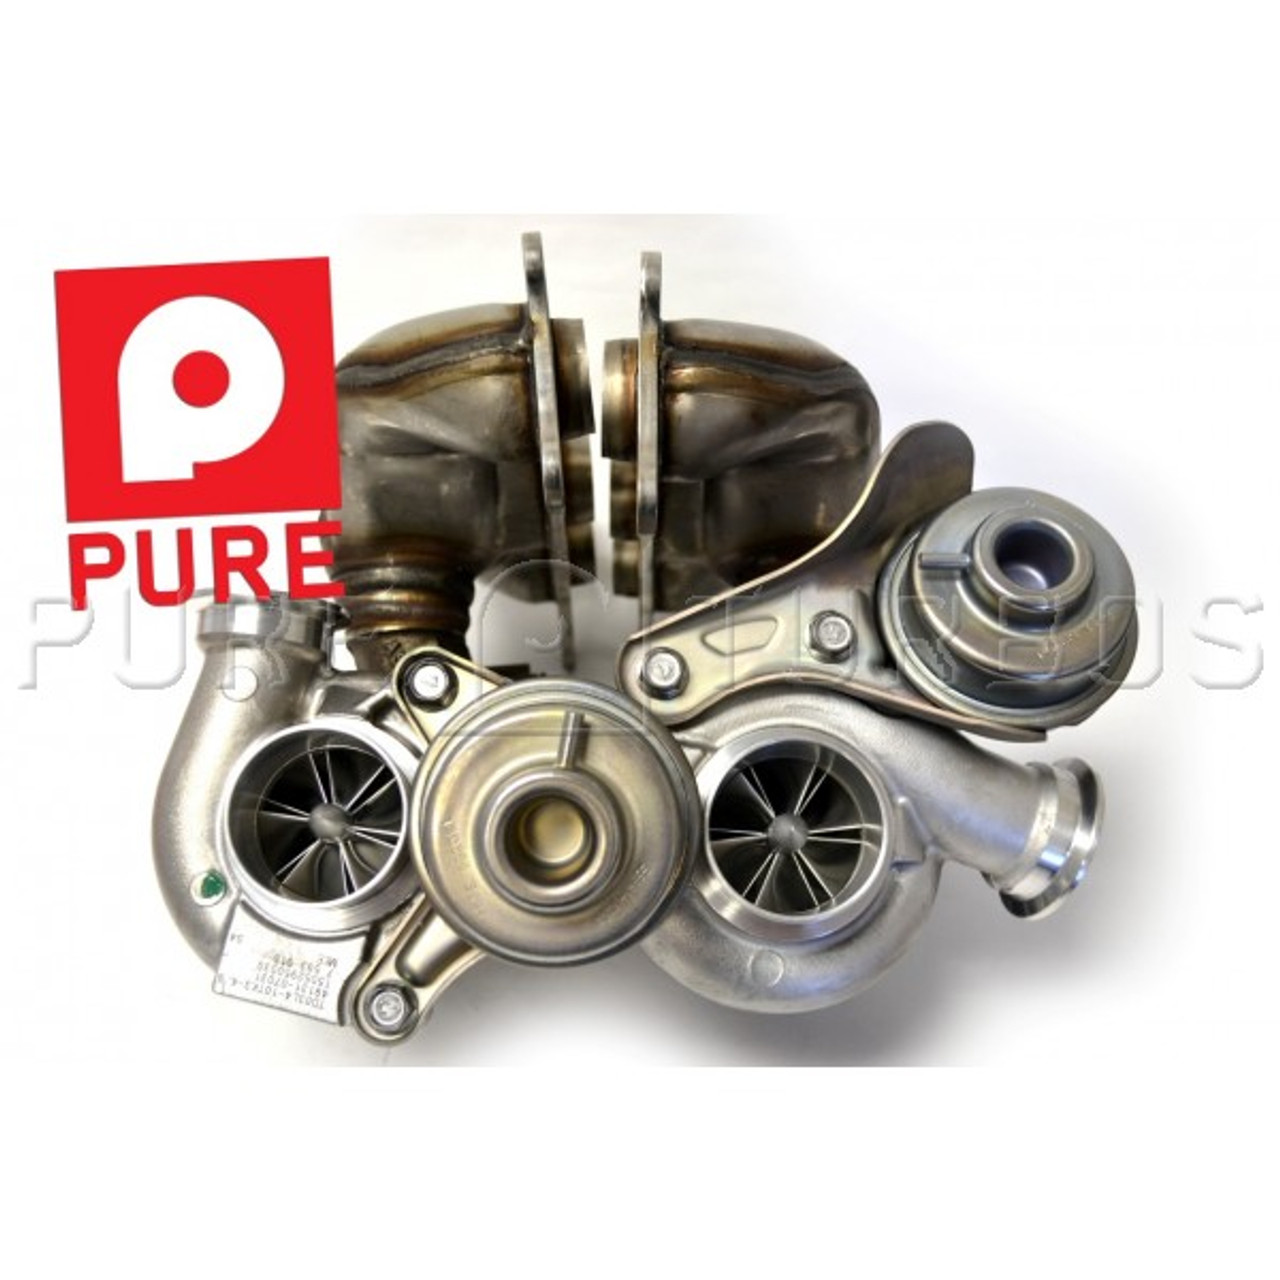 BMW N54 PURE Stage 2 Turbochargers